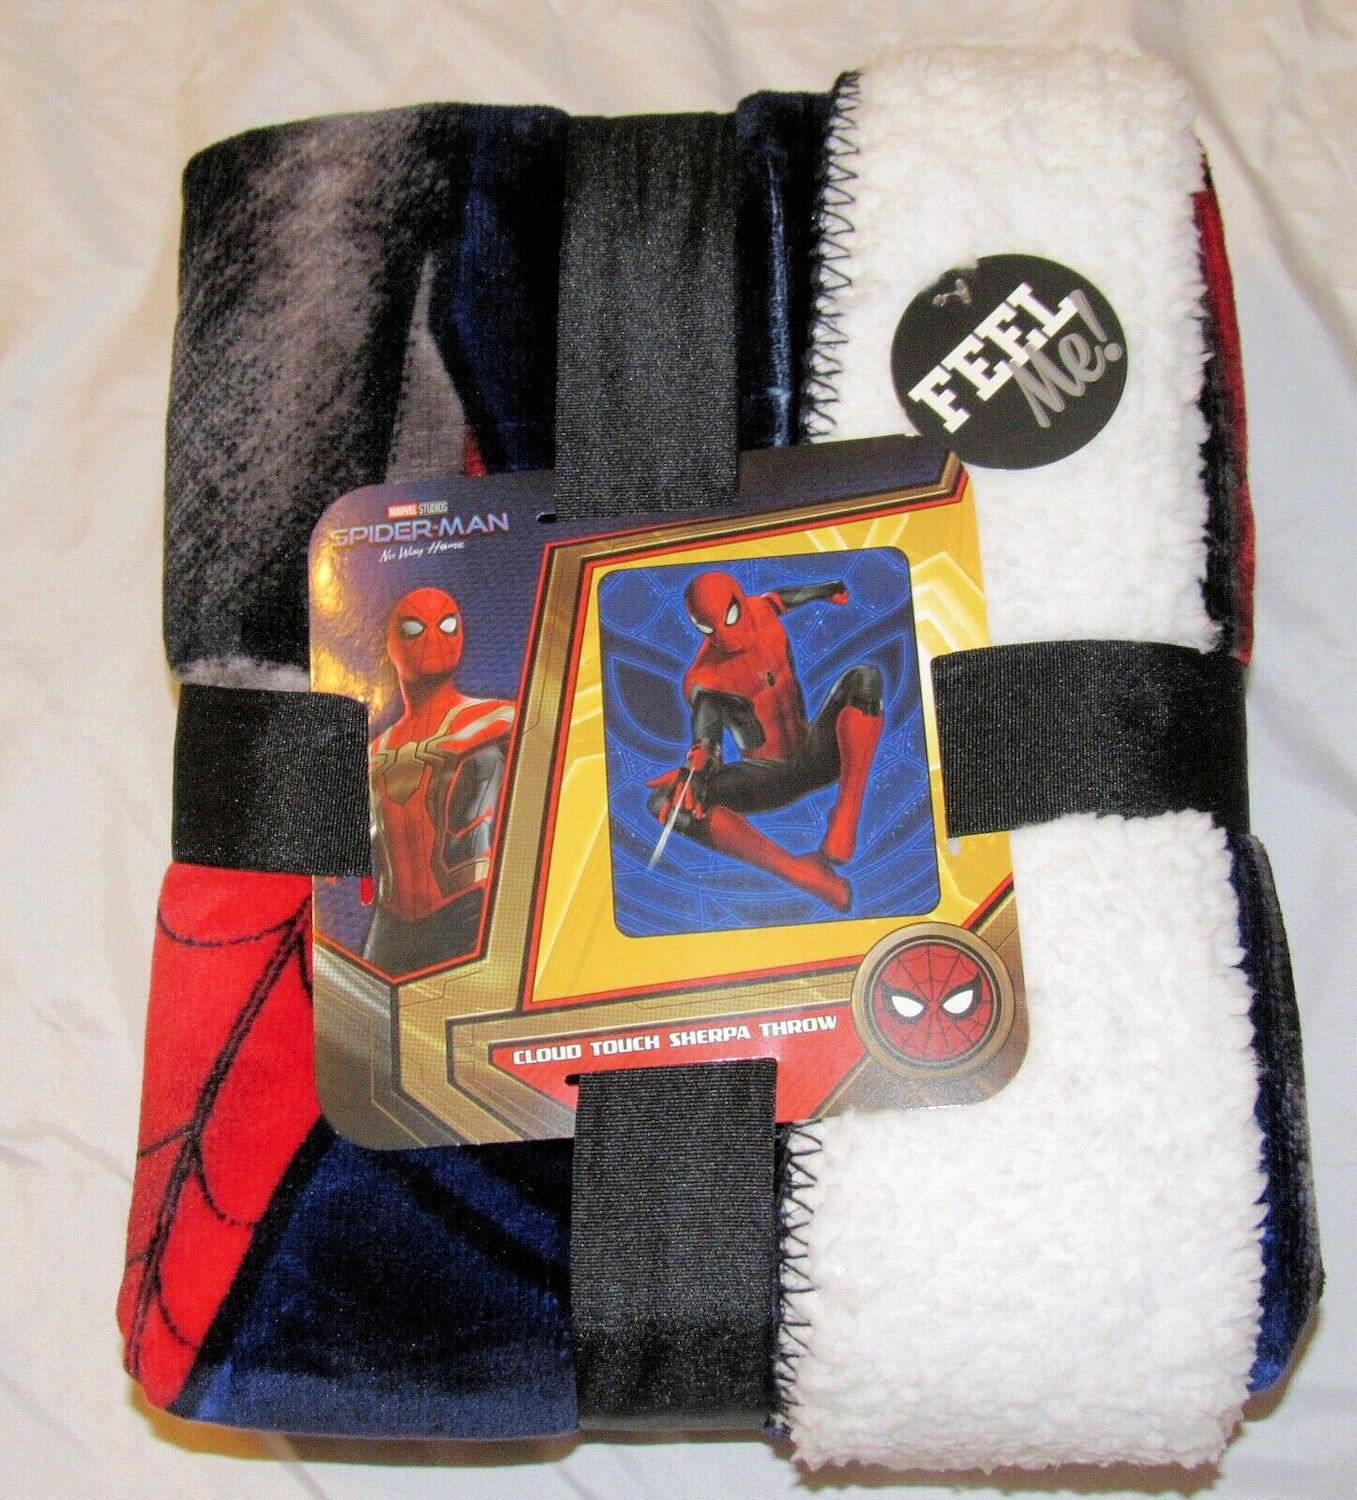 Spider-man: No Way Home Cloud Throw Blanket with Sherpa Back, 50" x 60"